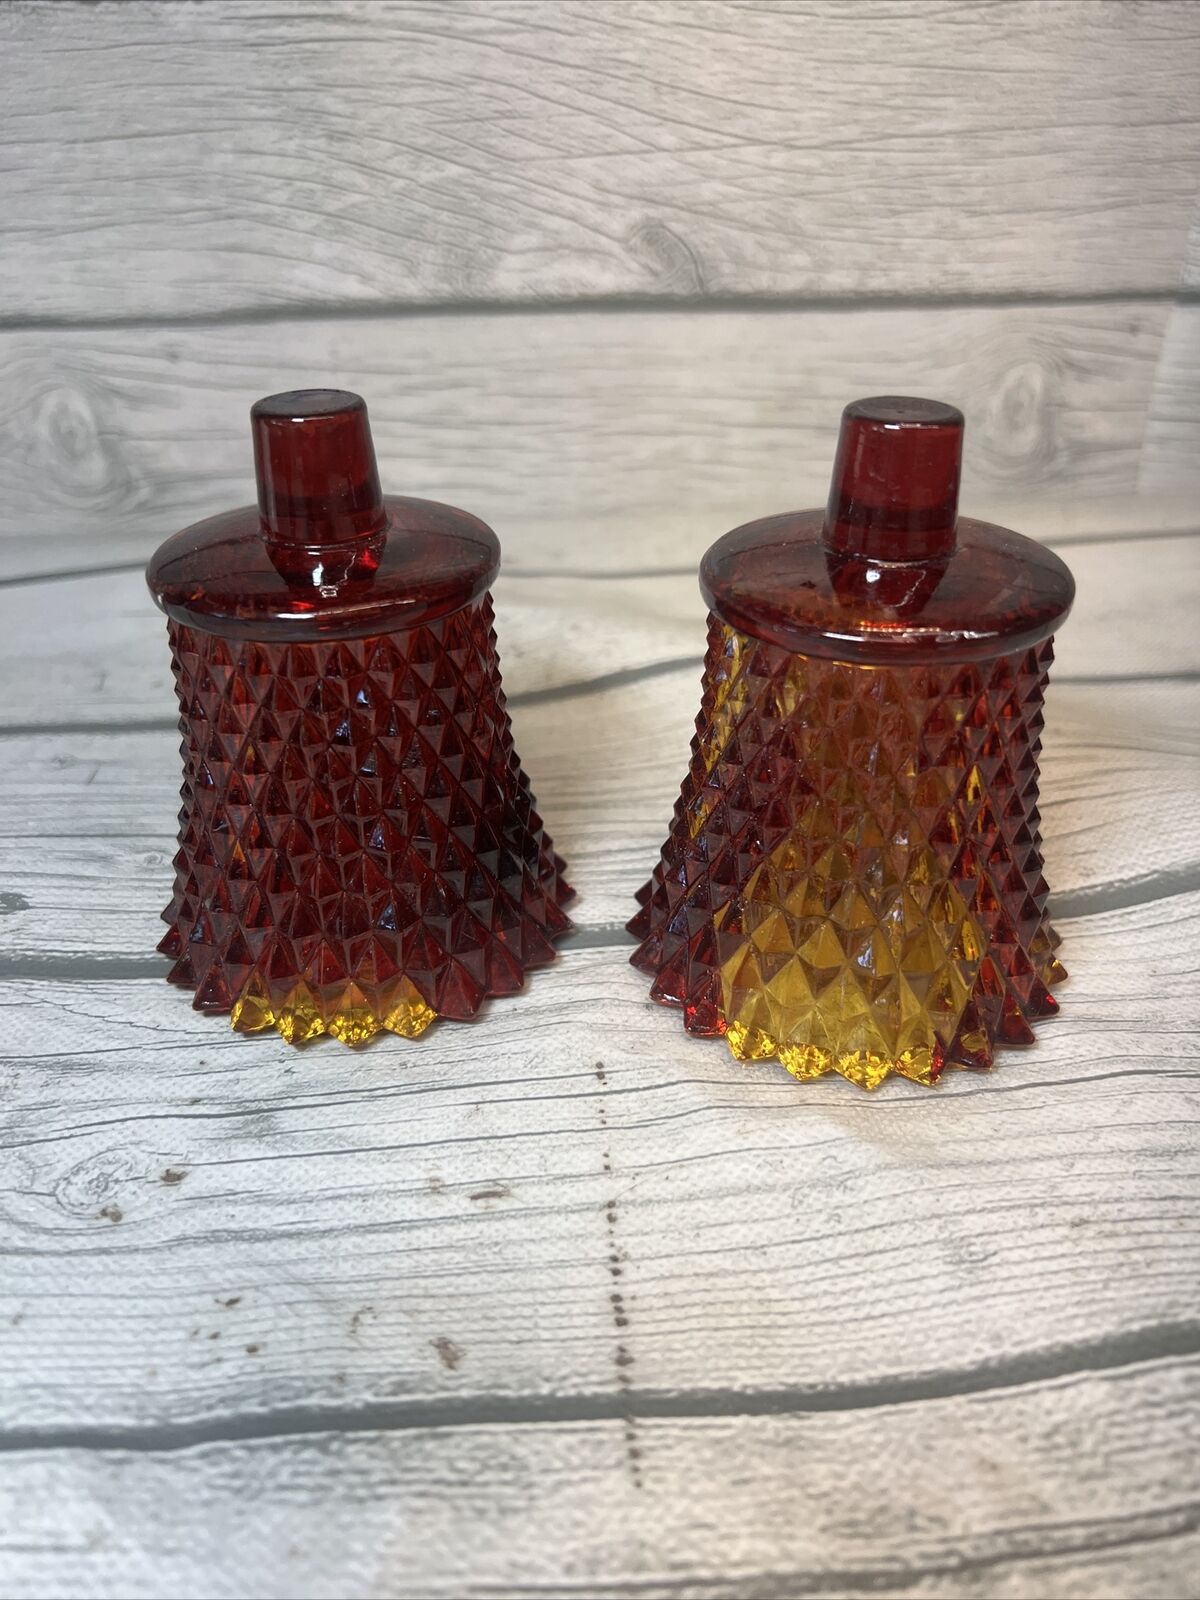 2 Vintage Diamond Cut Votive Candle Holders Peg Sconce Ruby Red Glass Read